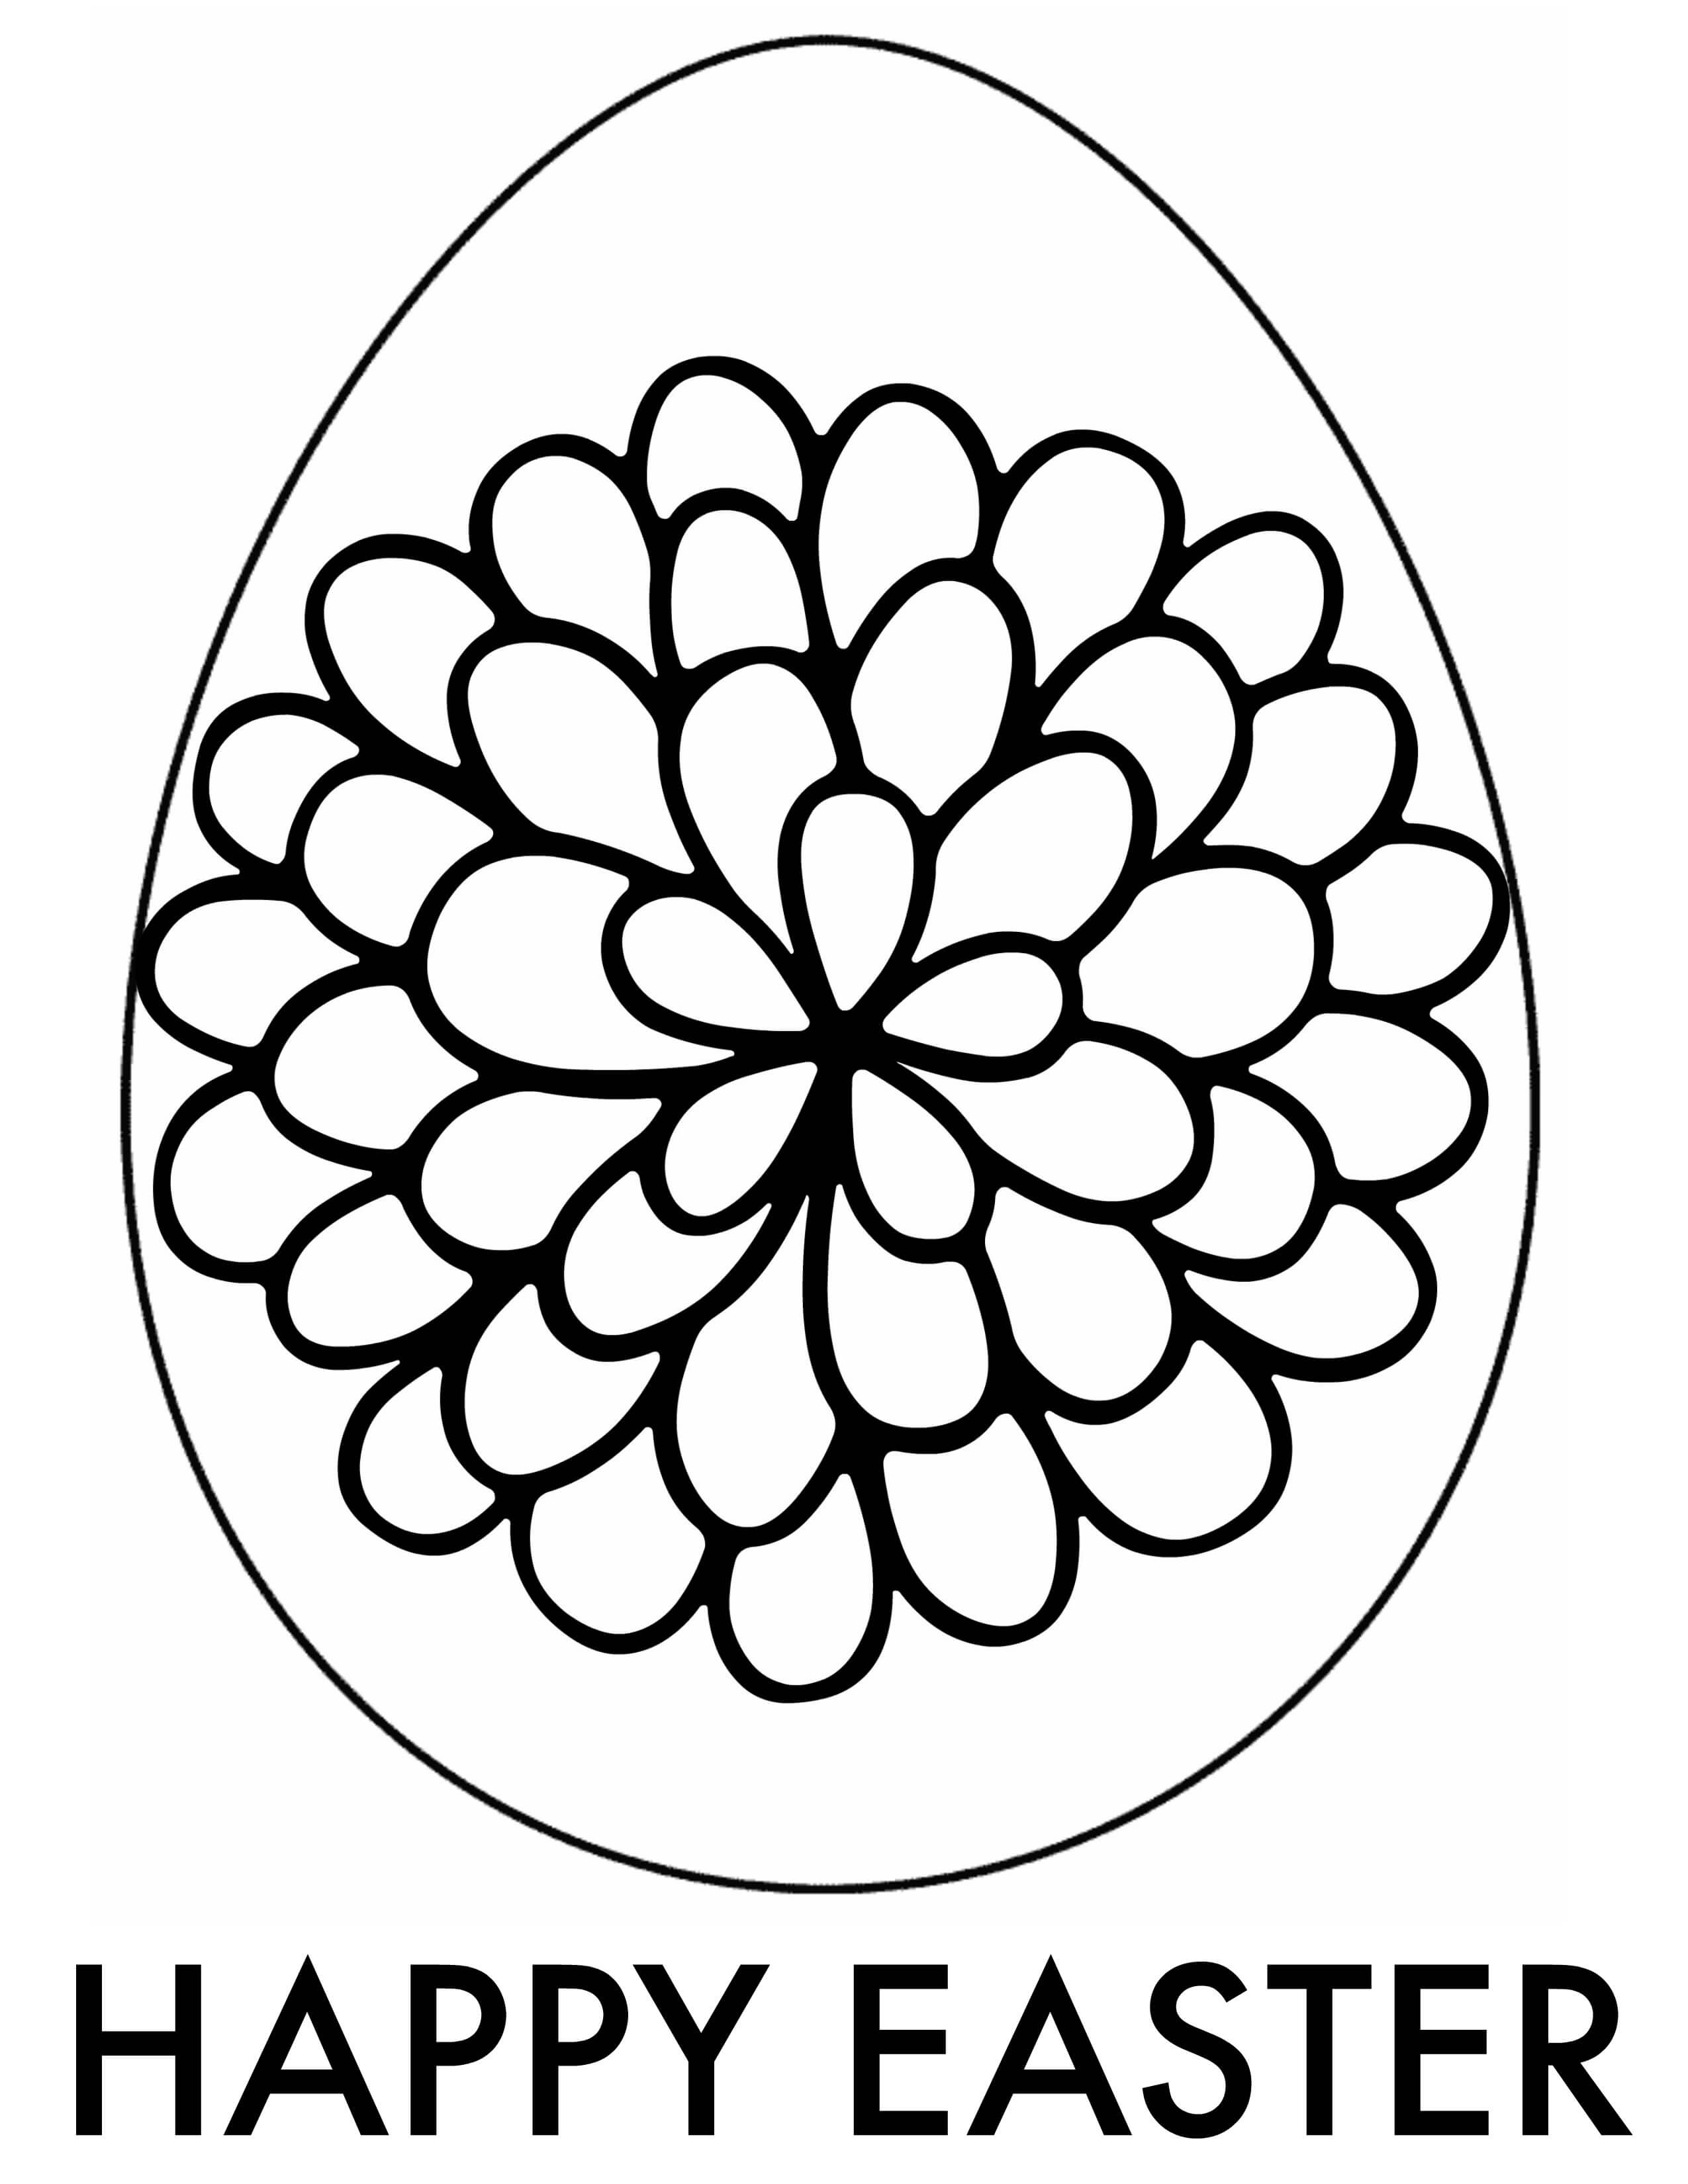 easter egg printable coloring pages That are Canny - Mason ...